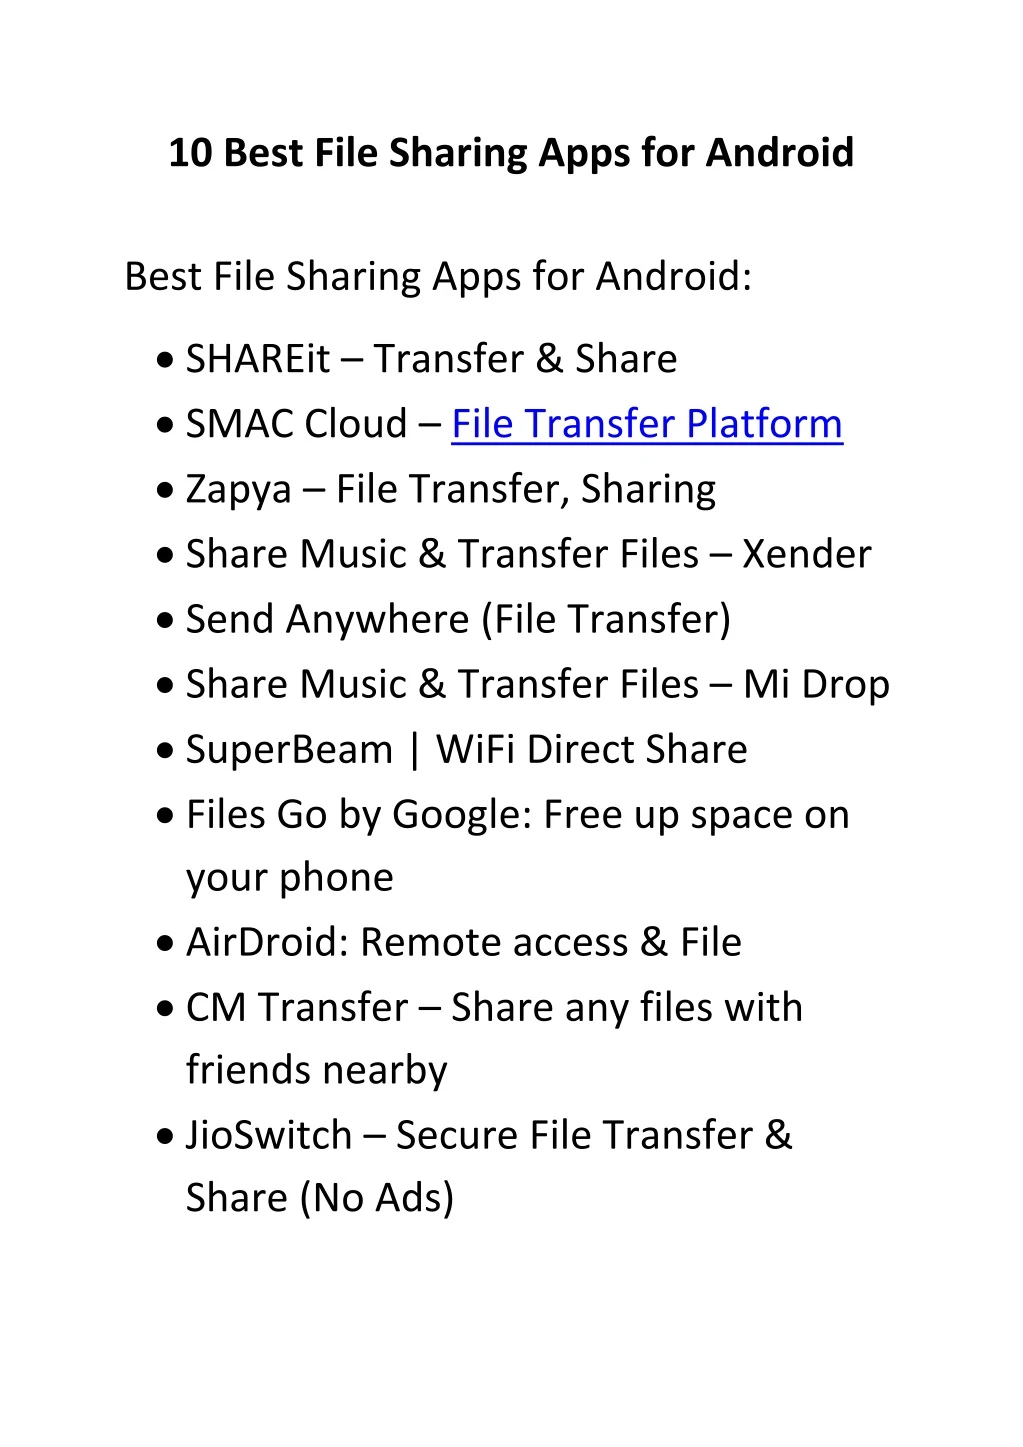 10 best file sharing apps for android